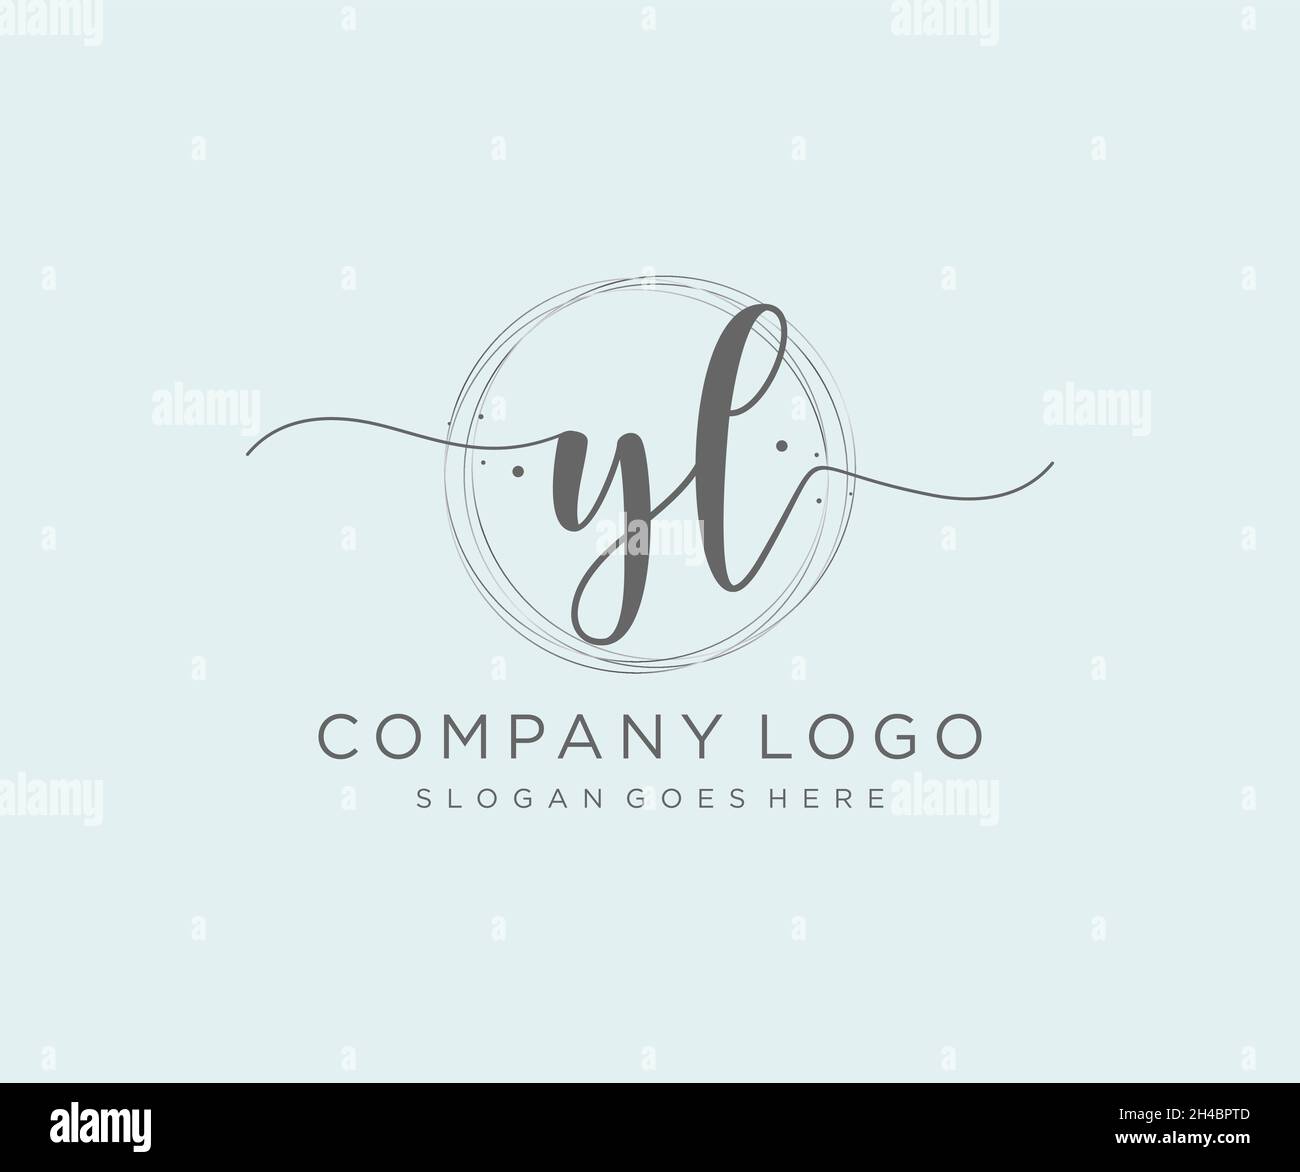 Modern yl logo design for business and company Vector Image